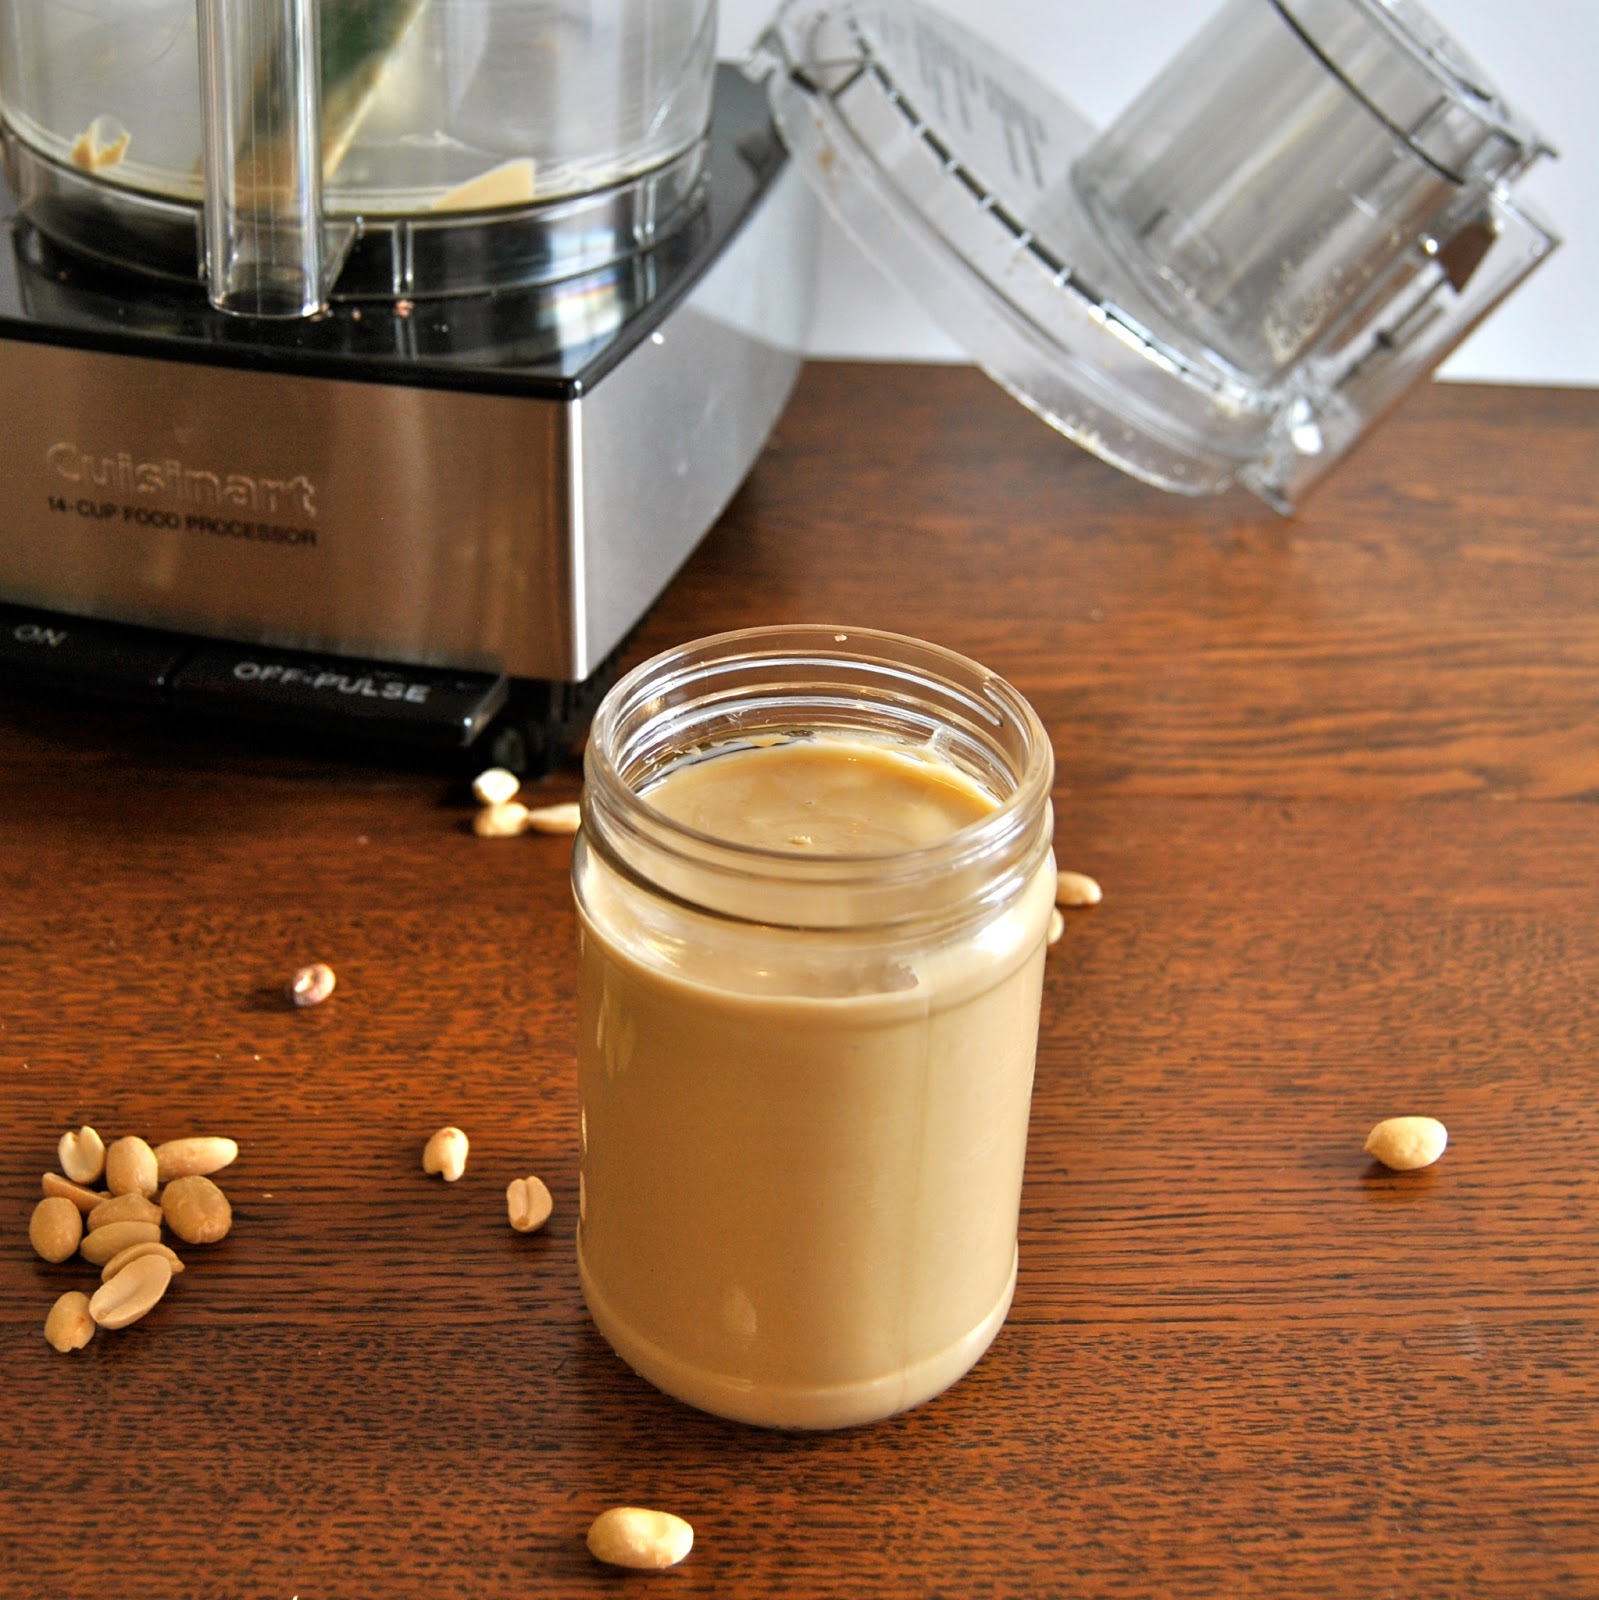 Running and Roasting: How to: Make Peanut Butter